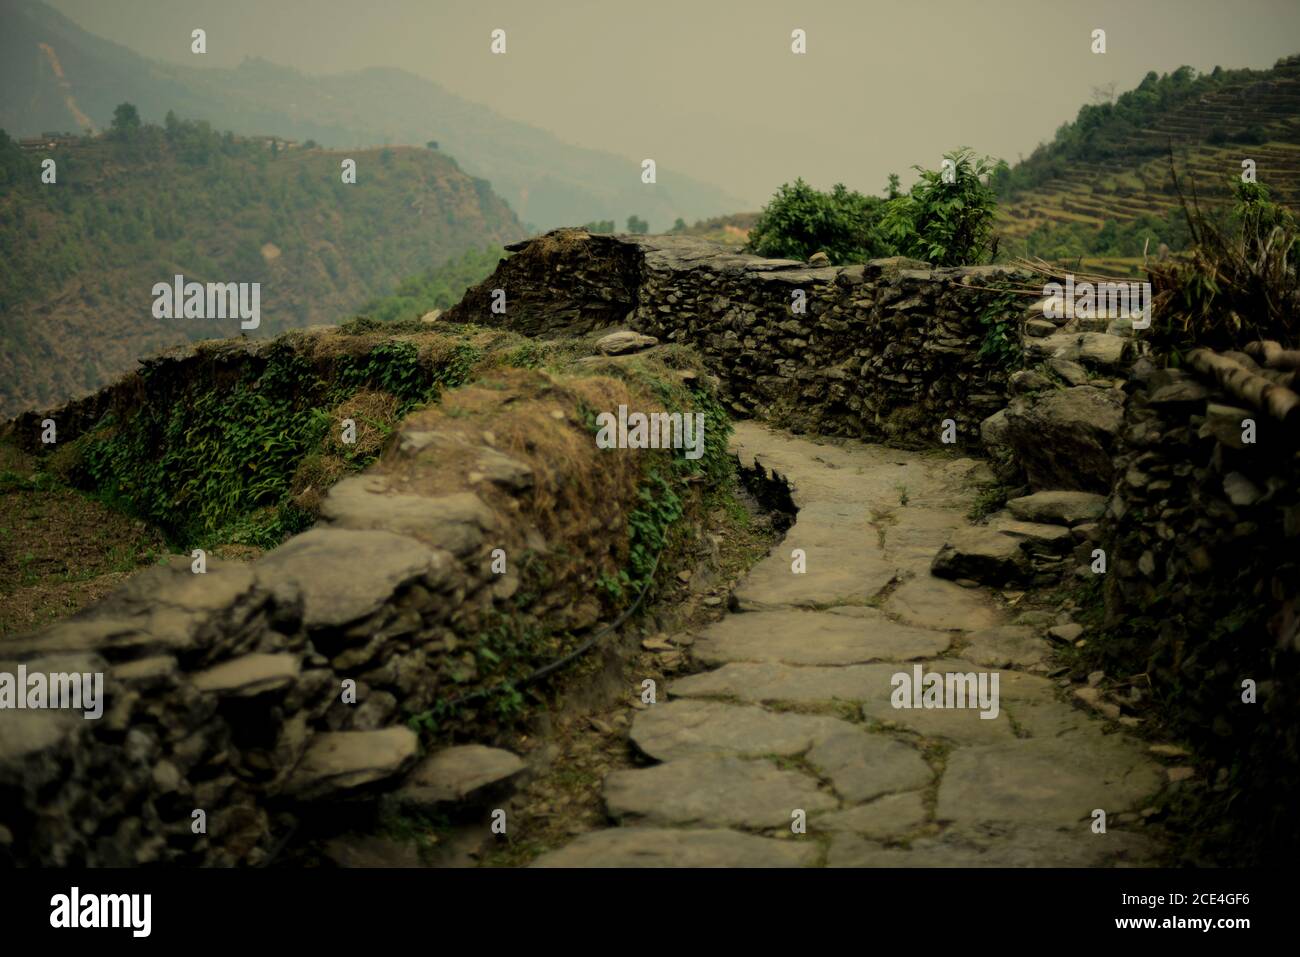 Stoned pathway in the agricultural village of Sidhane on Panchase mountain region, Nepal, where the community runs ecotourism. Stock Photo